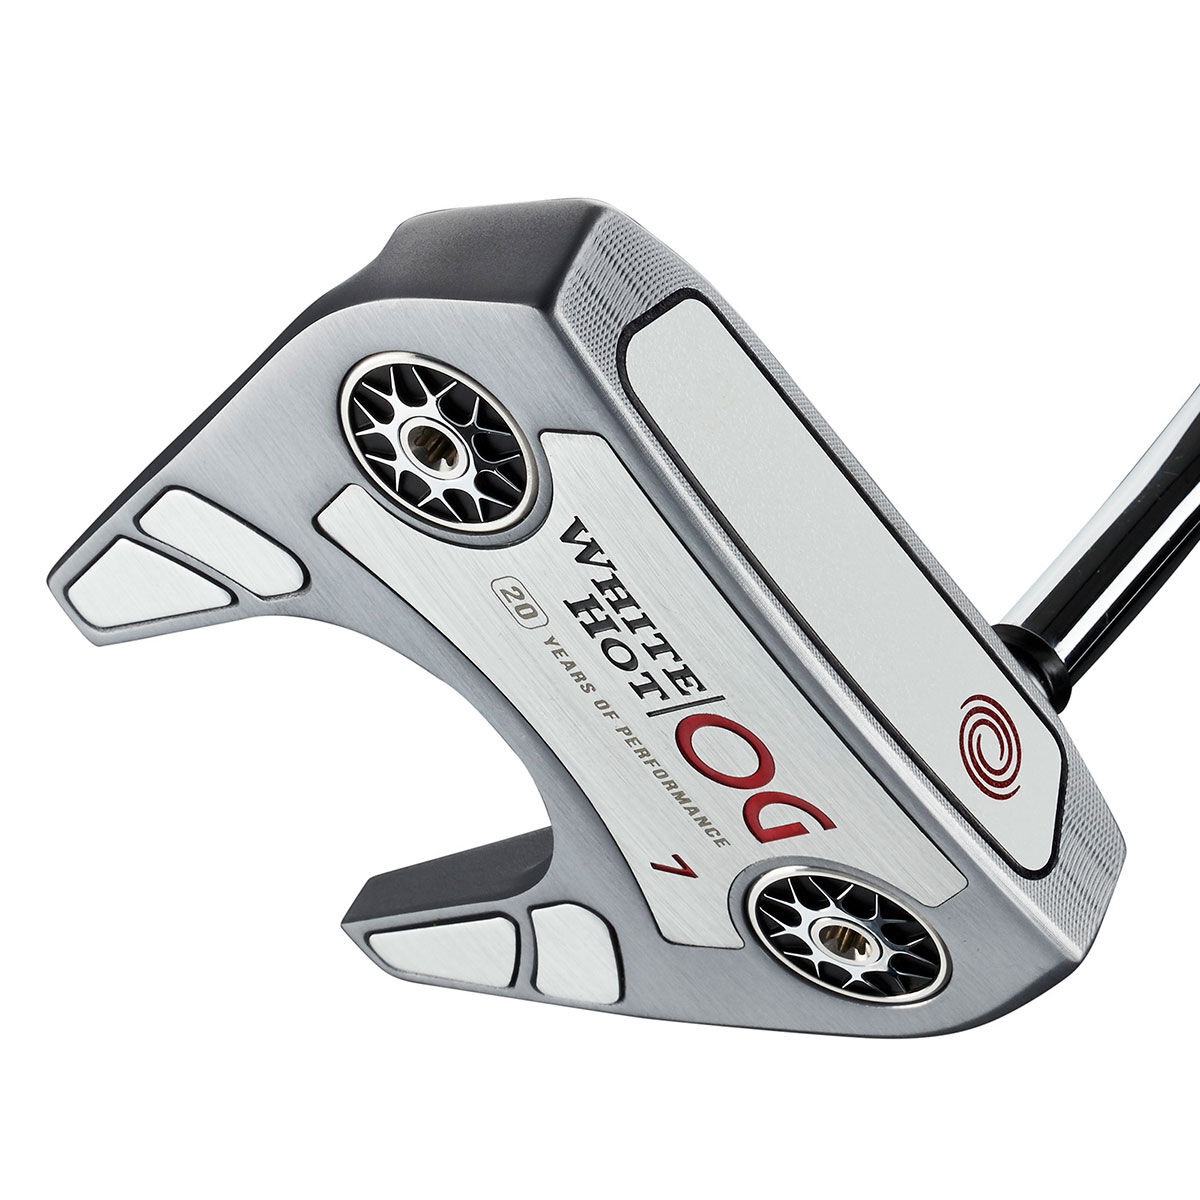 Odyssey White Hot OG 7 Stroke Lab Golf Putter, Mens, Right hand, 34 inches | American Golf